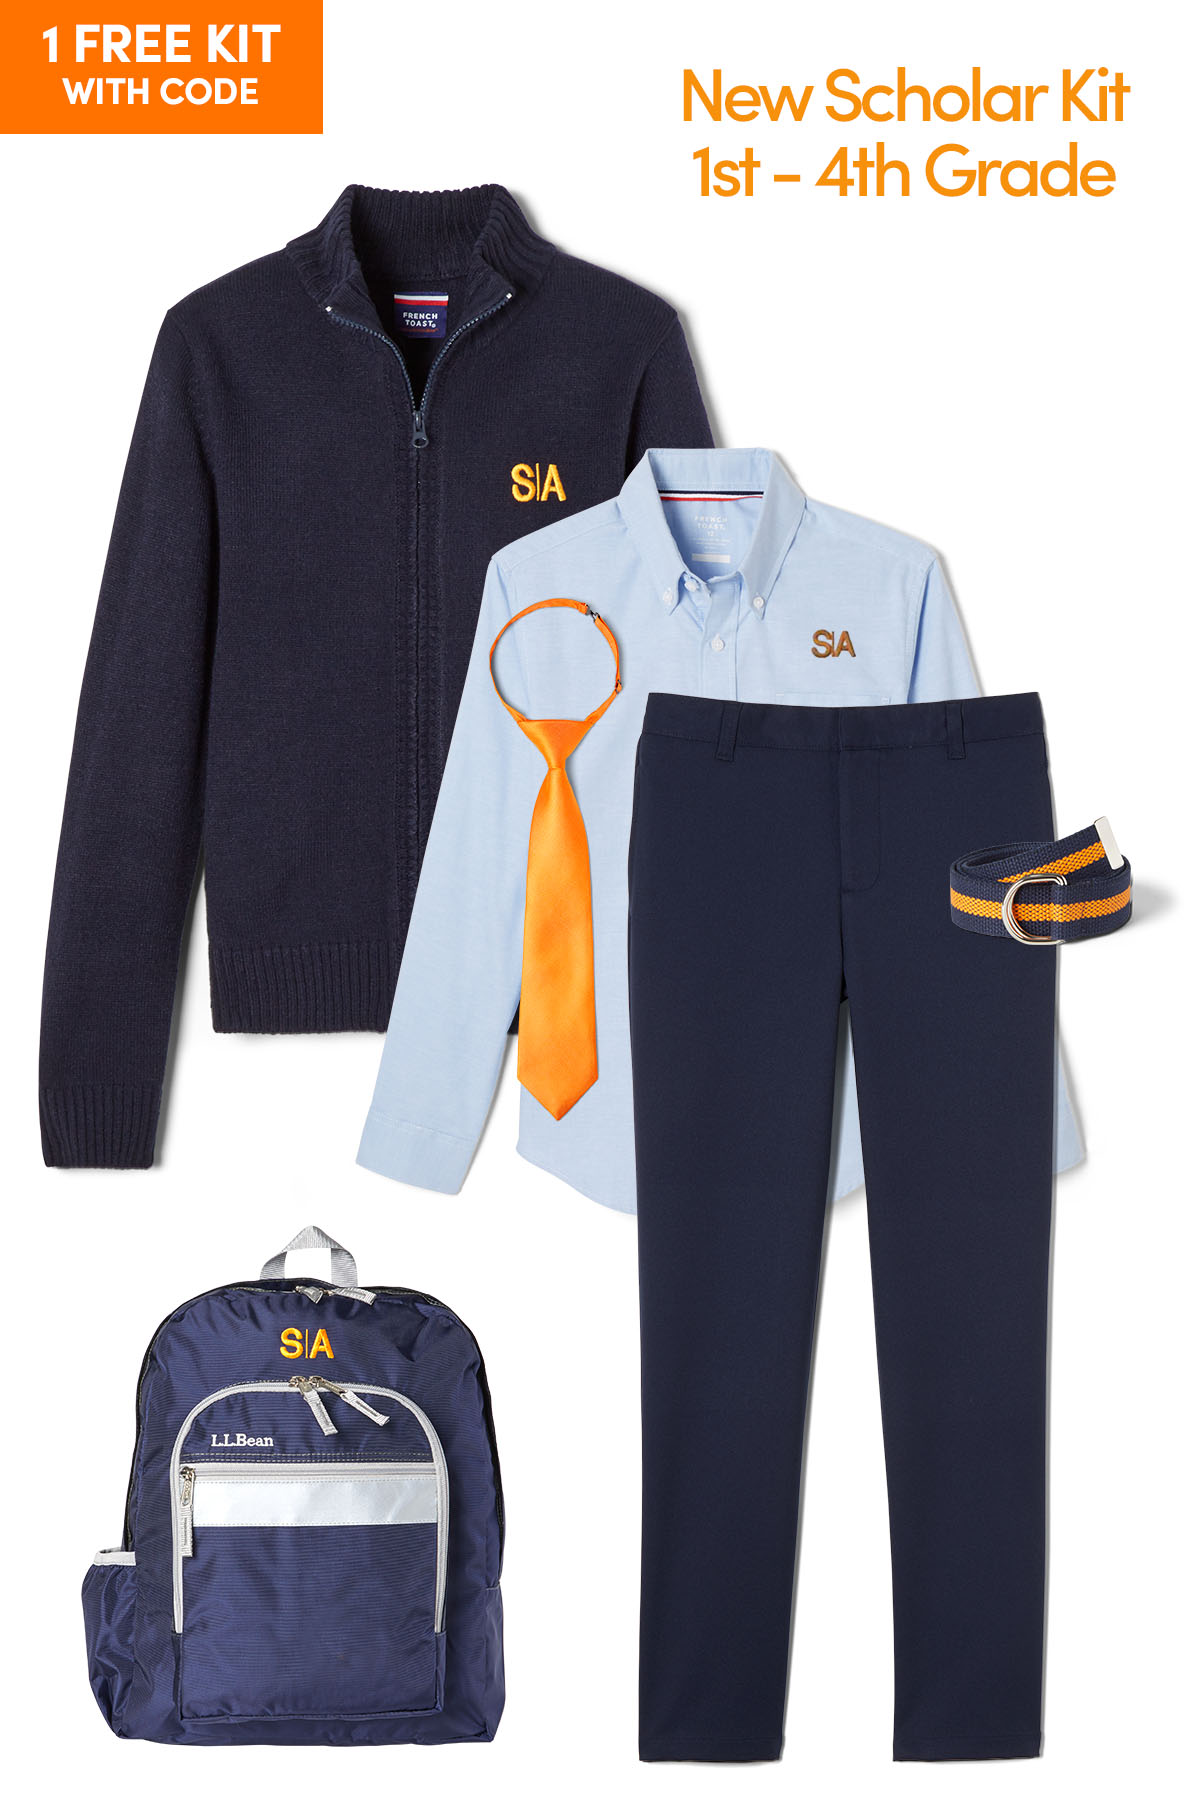 New Scholar Kit 1st to 4th Grade. 1 free kit with code